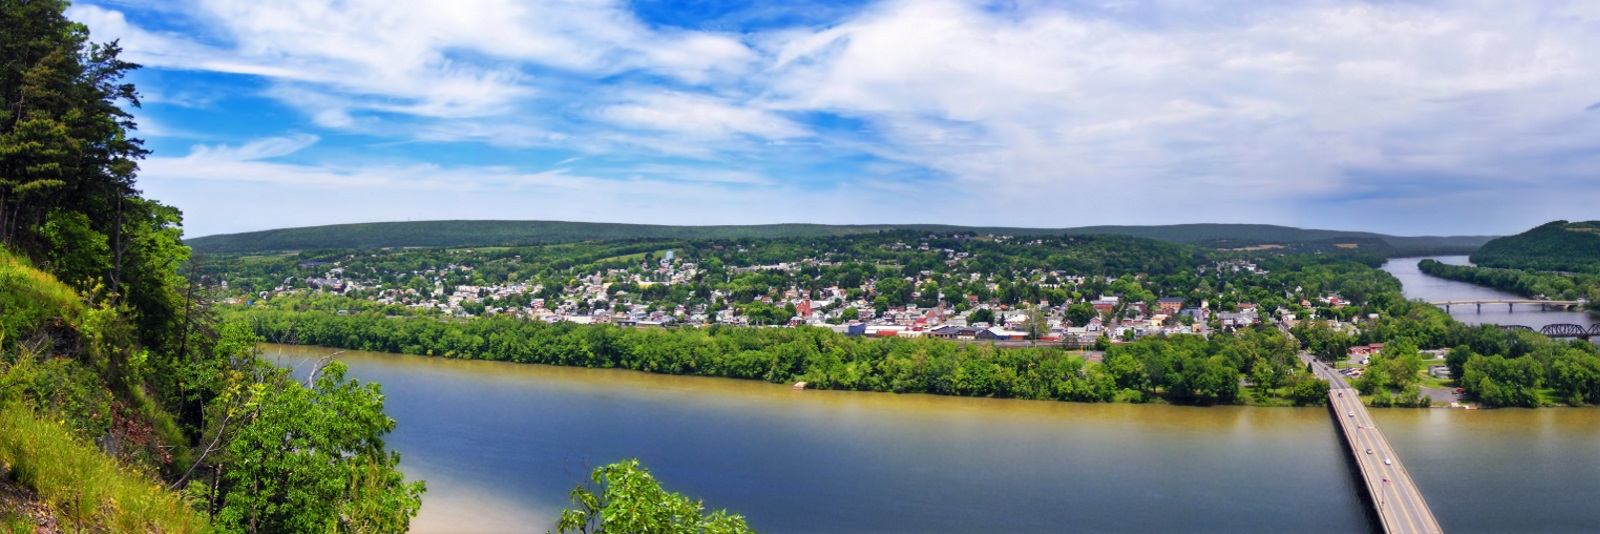 Susquehanna Confluence with West Branch (Photo by Nicholas A. Tonelli)